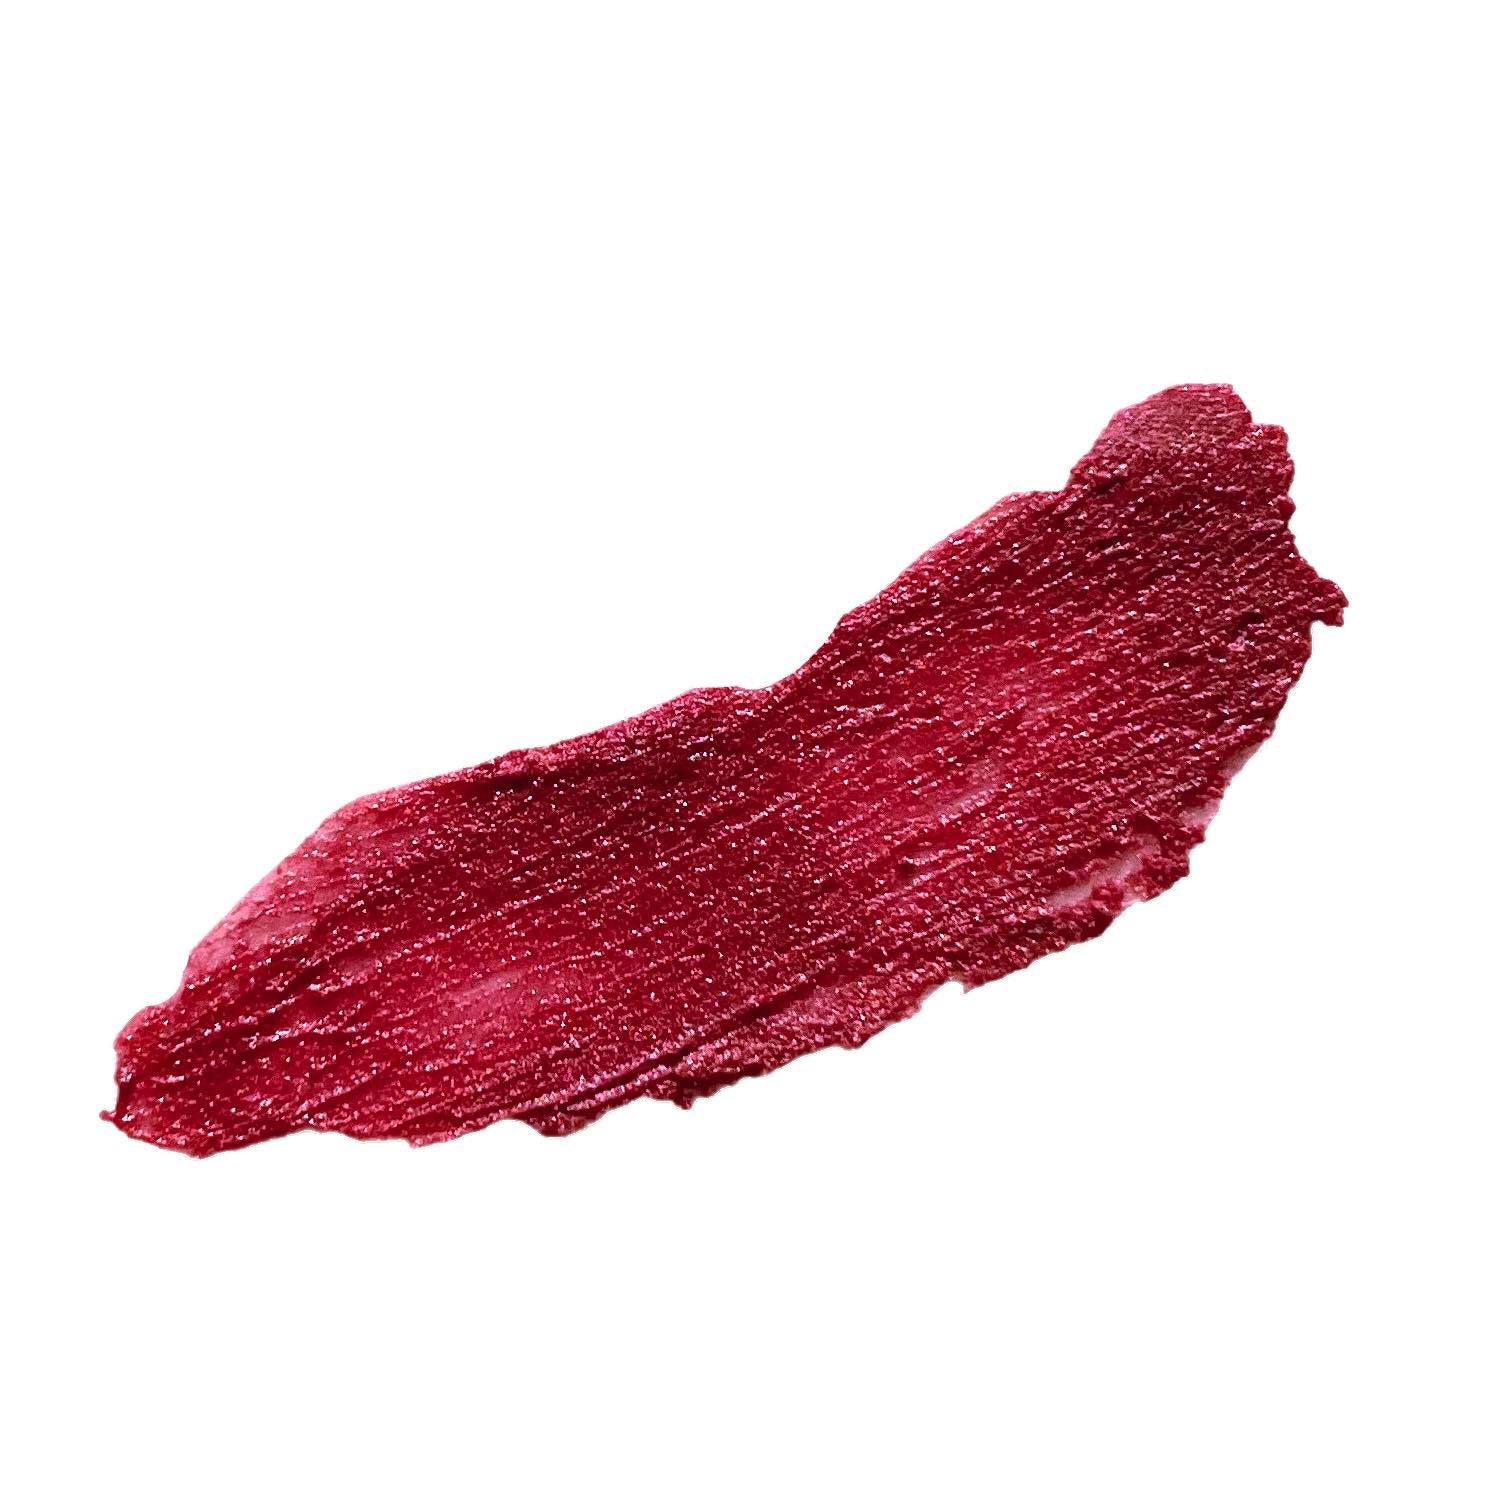 soft plumb swatch tinted lip balm that gives your lips a deep pink depth on white background depth